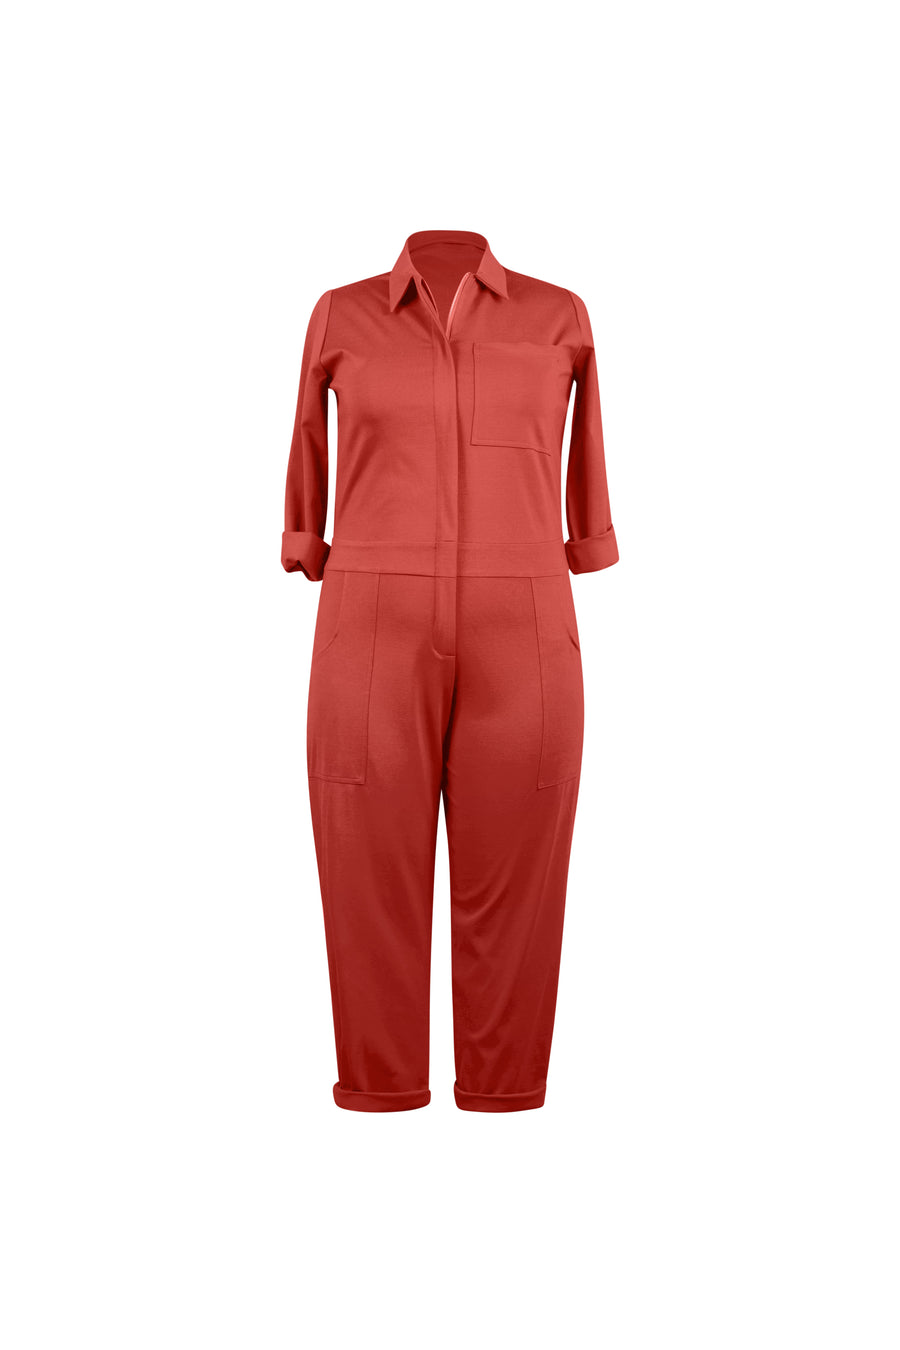 All Season Coveralls with Long Sleeves